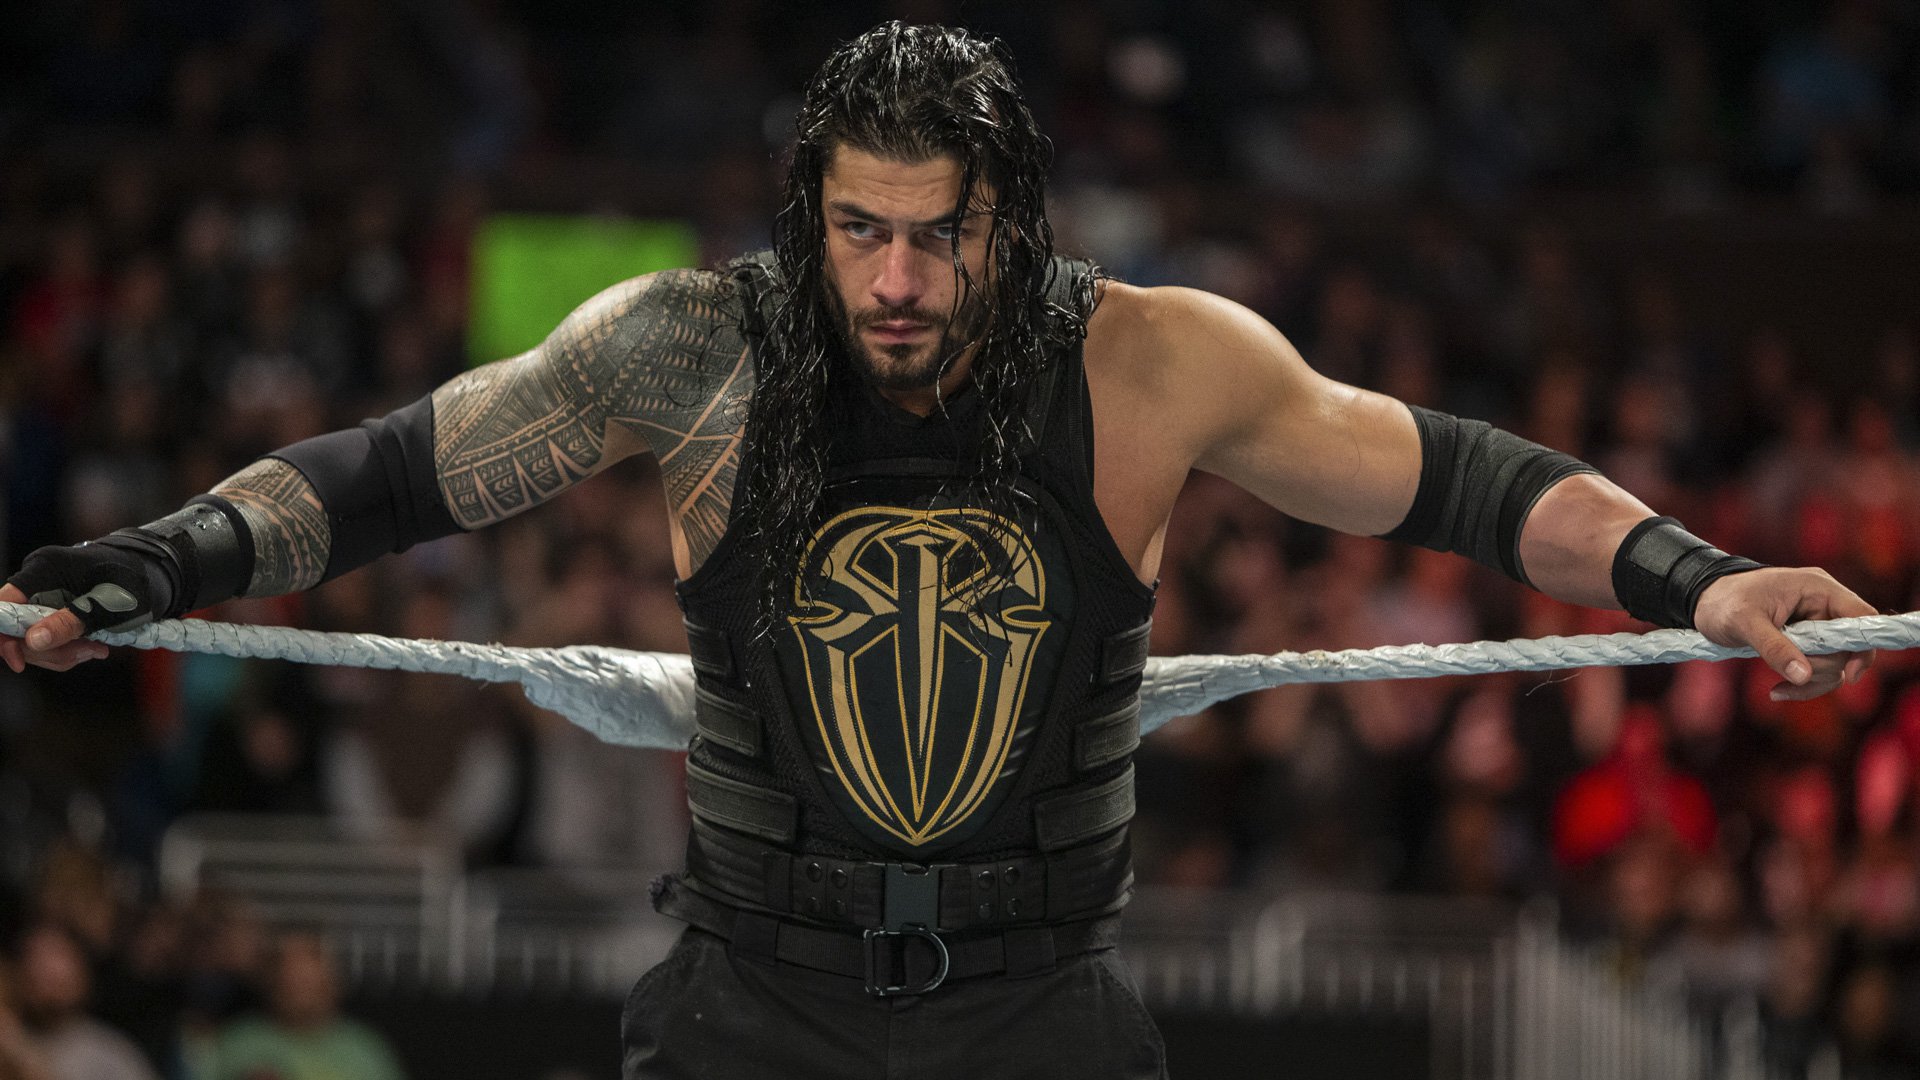 Roman Reigns on facing Ronda Rousey